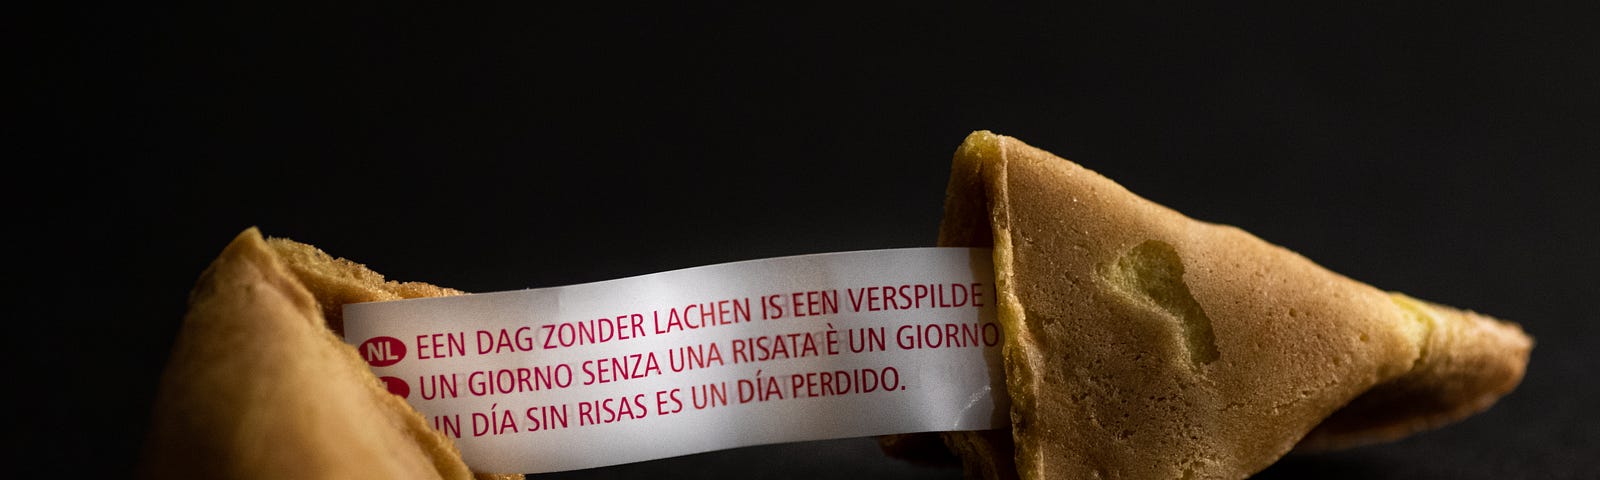 Fortune cookie split in two showing message inside